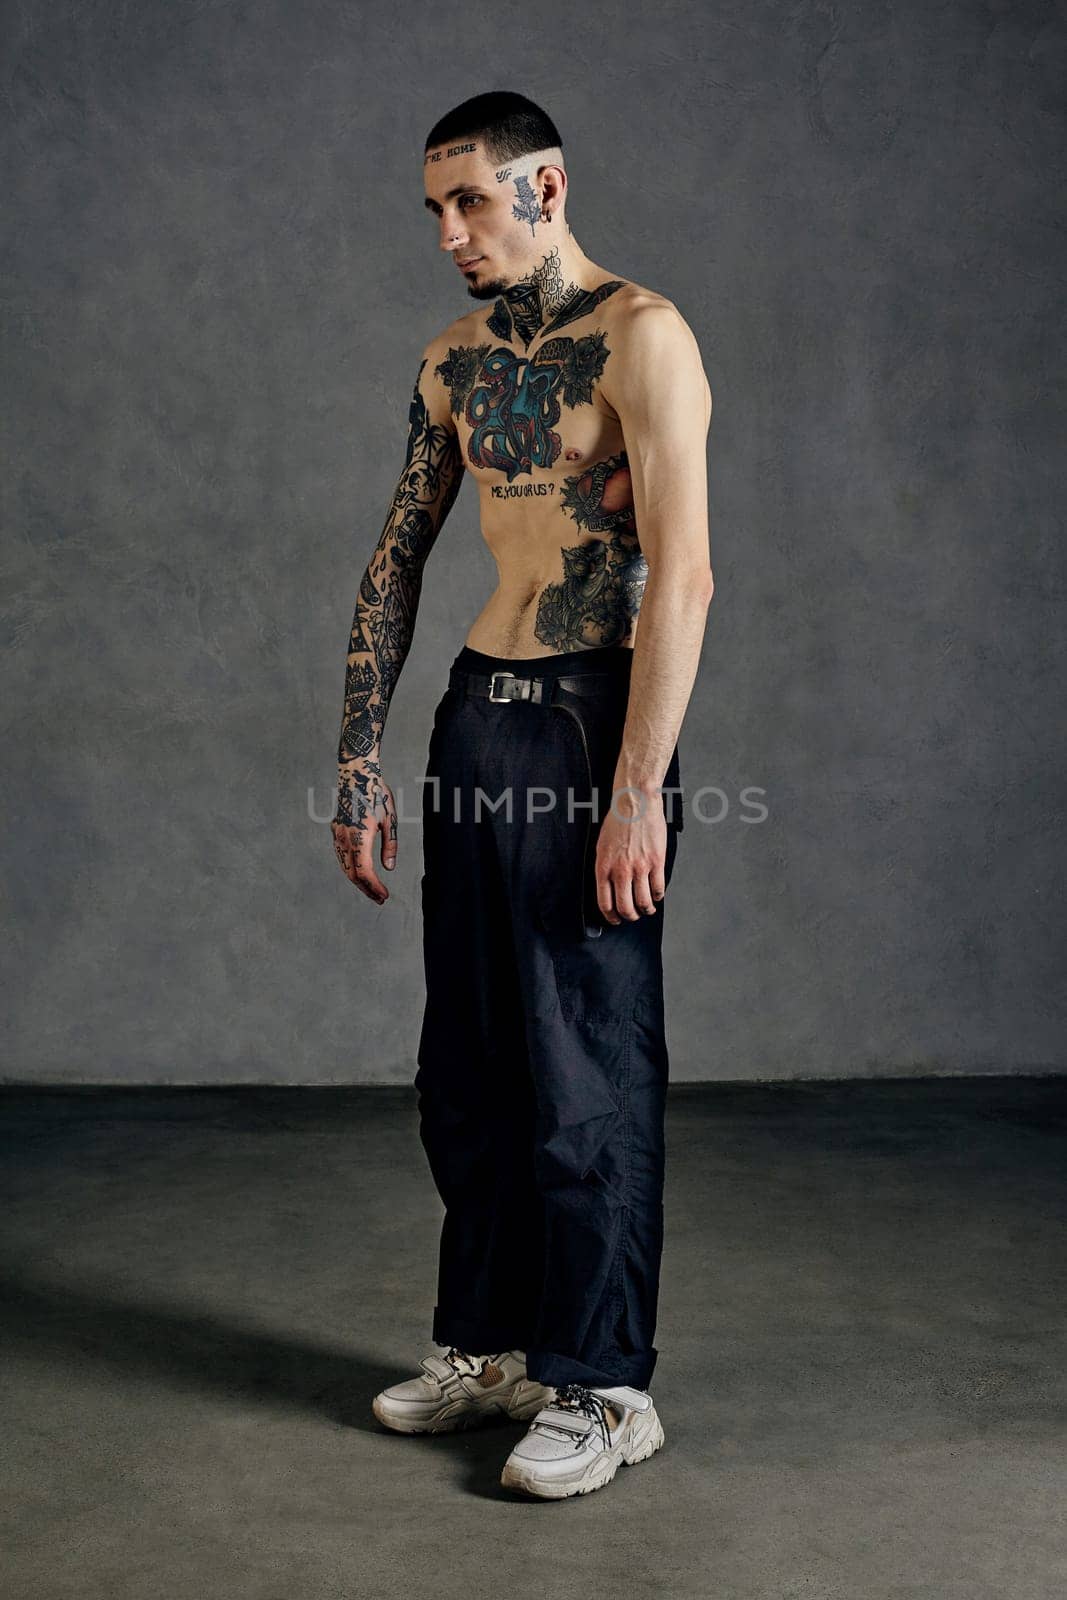 Strong performer with tattooed body and face, naked torso, beard. Dressed in black pants and white sneakers. He is dancing against gray studio background. Dancehall, hip-hop. Full length, copy space